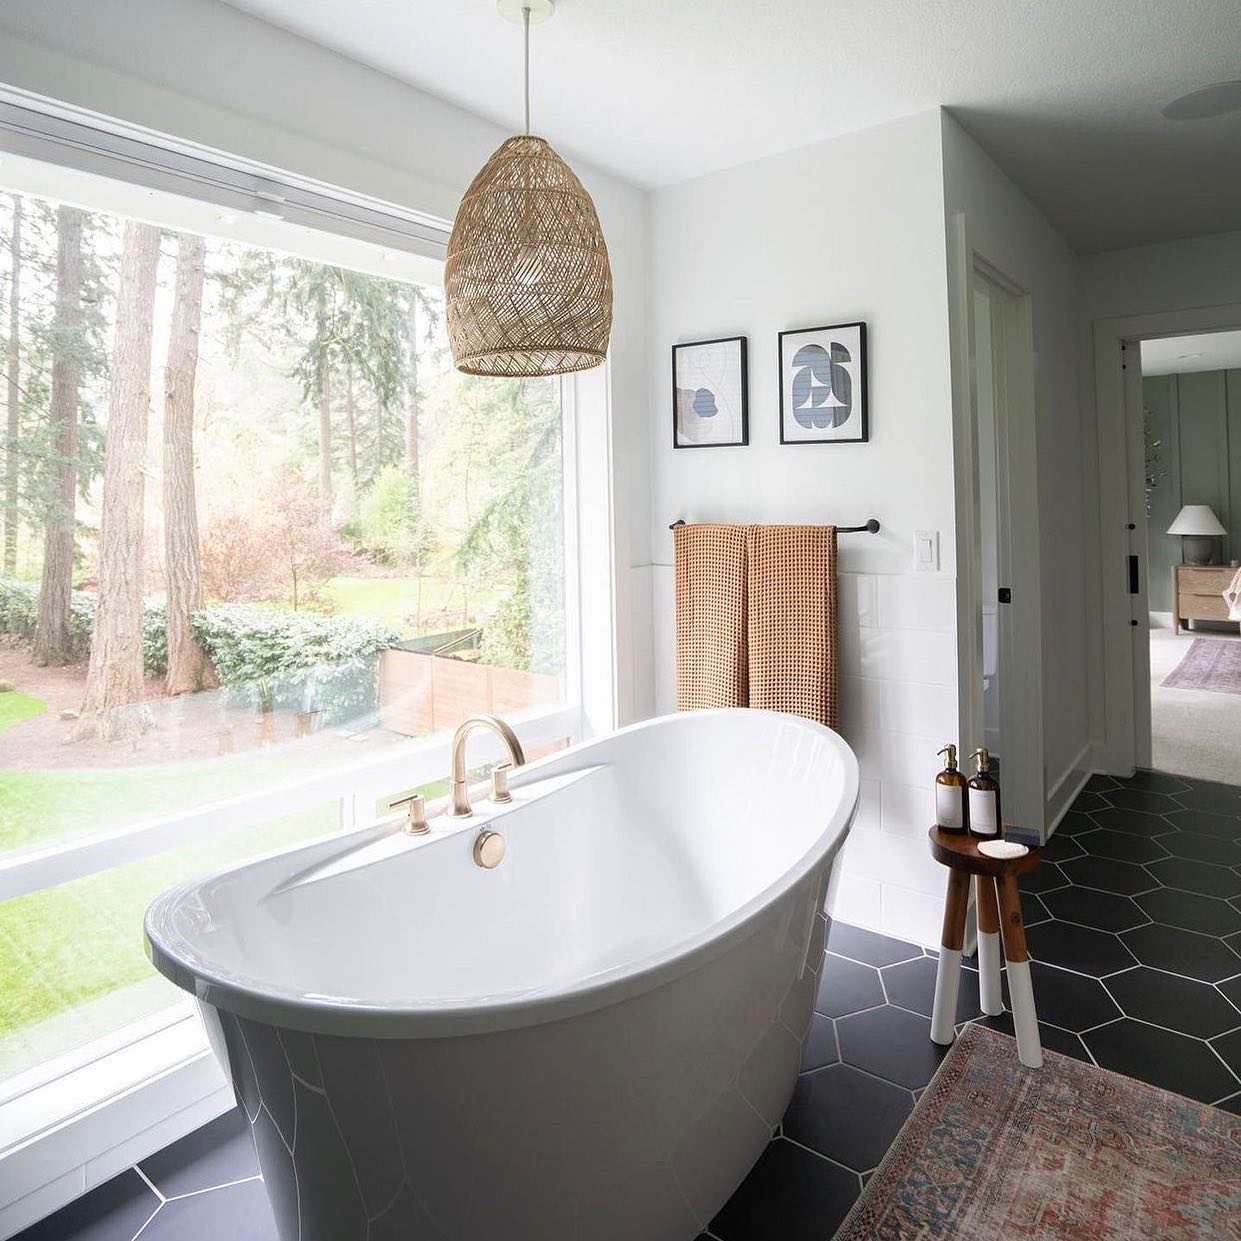 Bath with a view😍
A beautiful self-care Sunday space by @firwood.farmhouse ft. our Rhythm black hex. #emsertile #sundayvibes